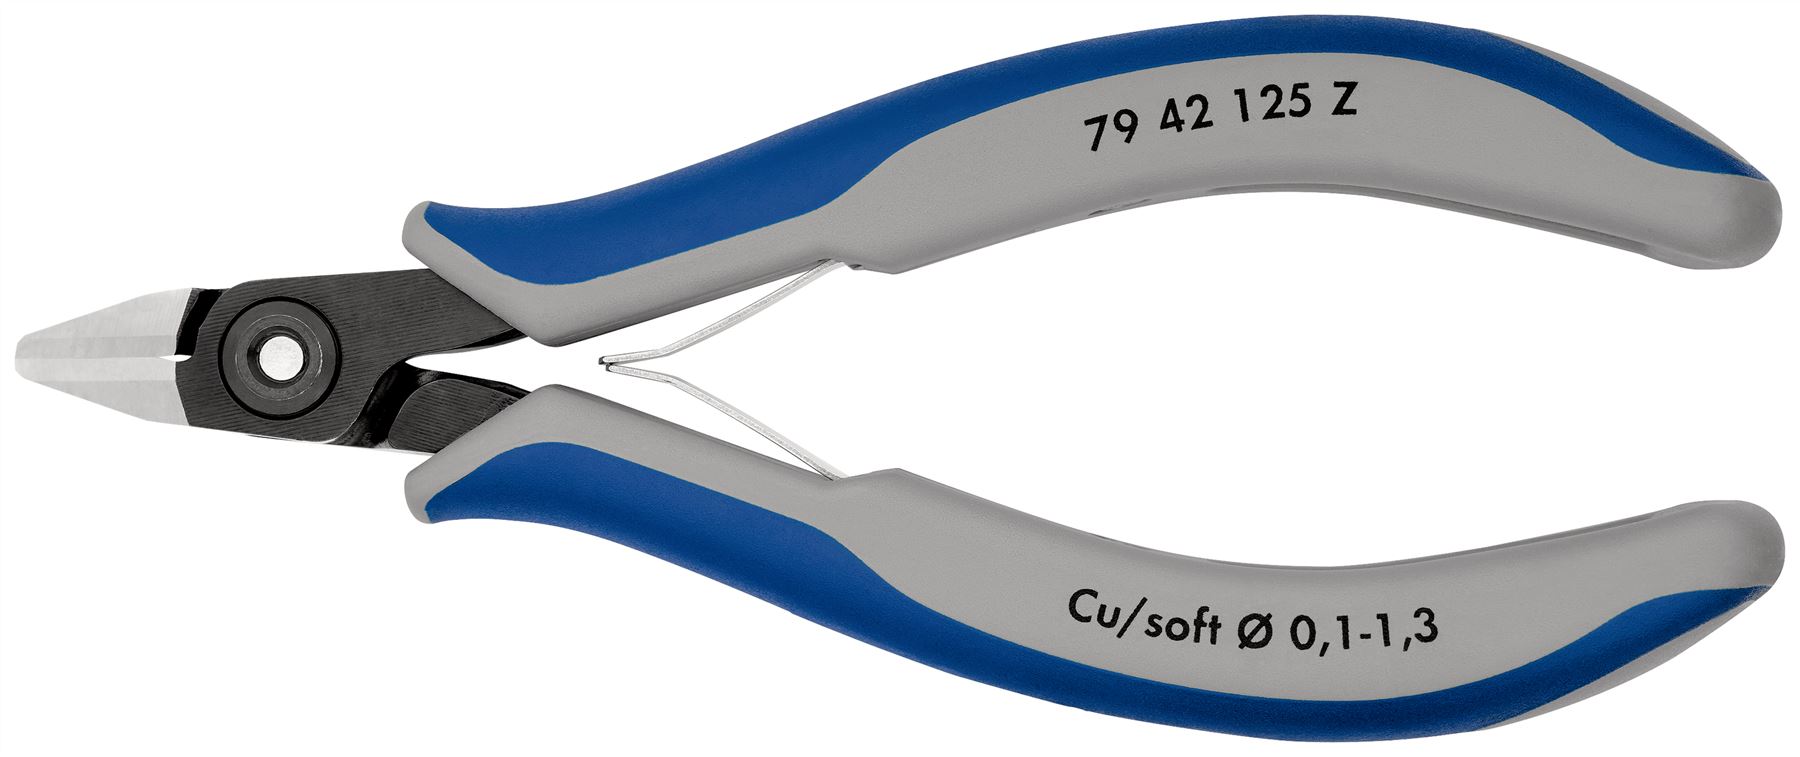 KNIPEX Precision Electronics Diagonal Cutter Cutting Pliers 125mm Multi Component Grips 79 42 125 Z